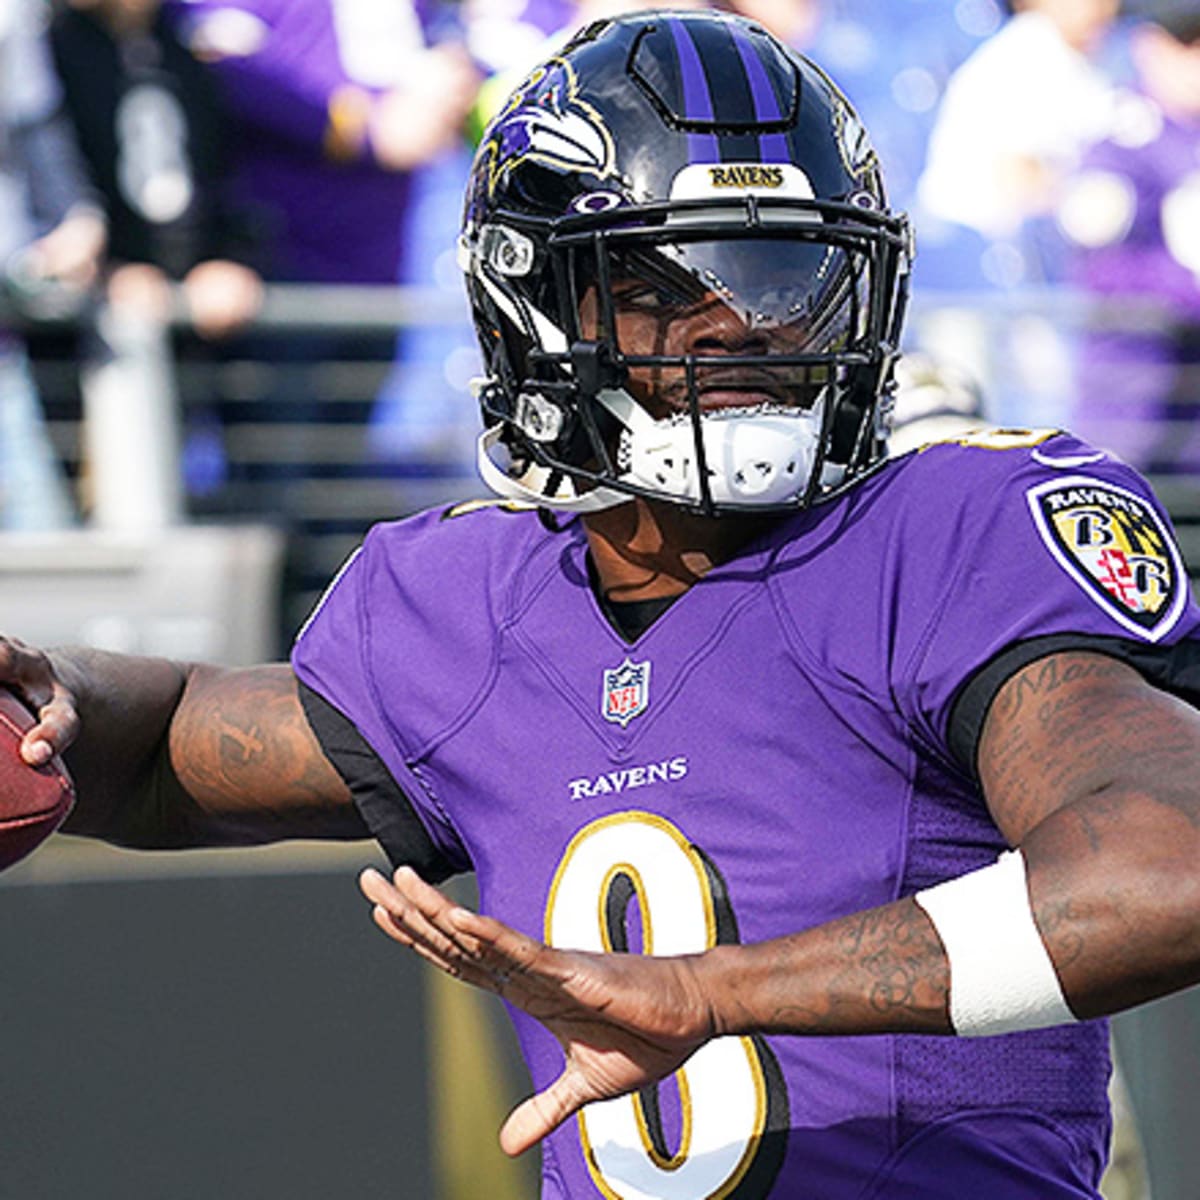 Ravens' Lamar Jackson is healthy this time and gets his shot to